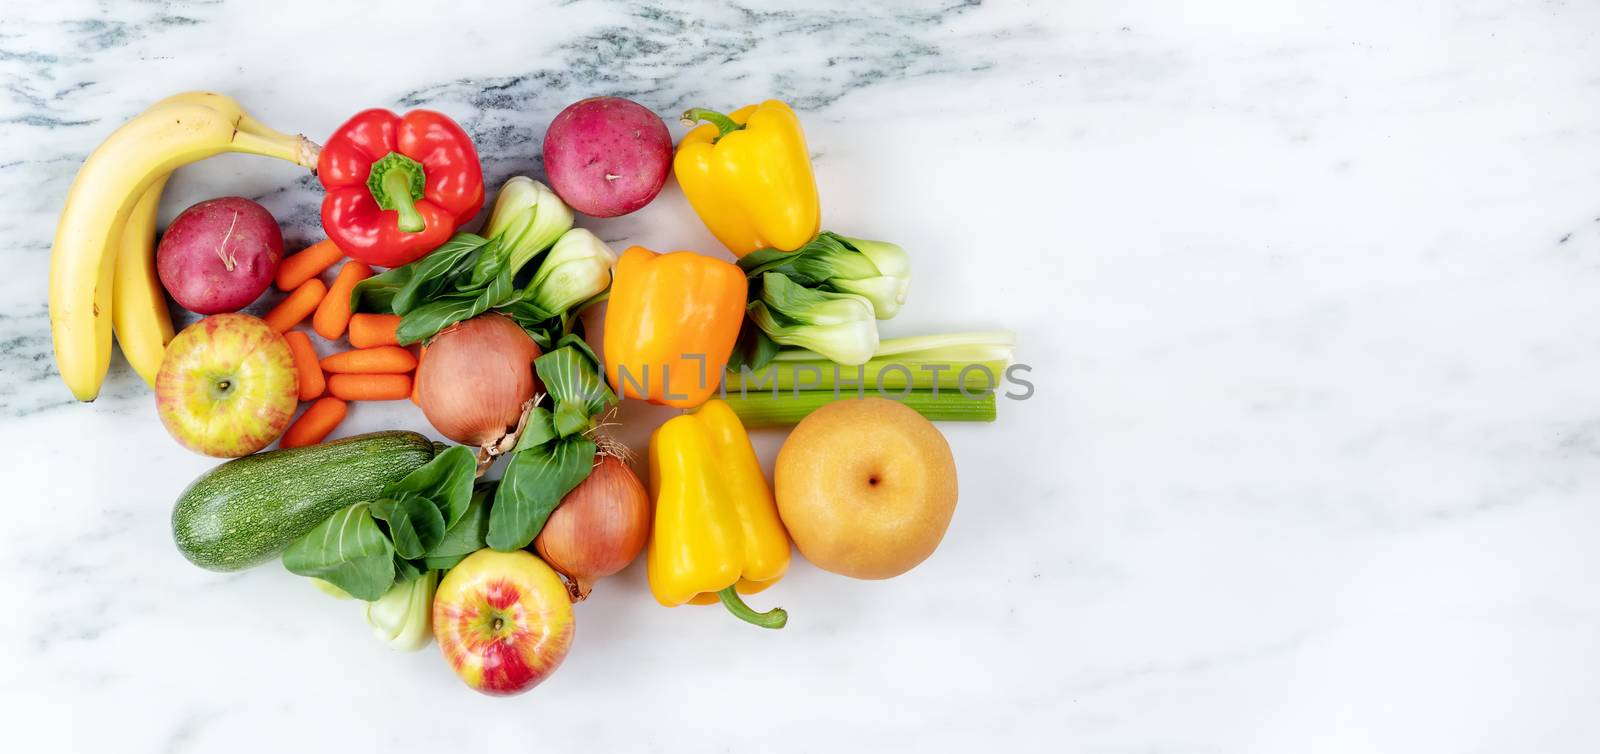 Organic vegetables and fruit for a healthy diet concept by tab1962